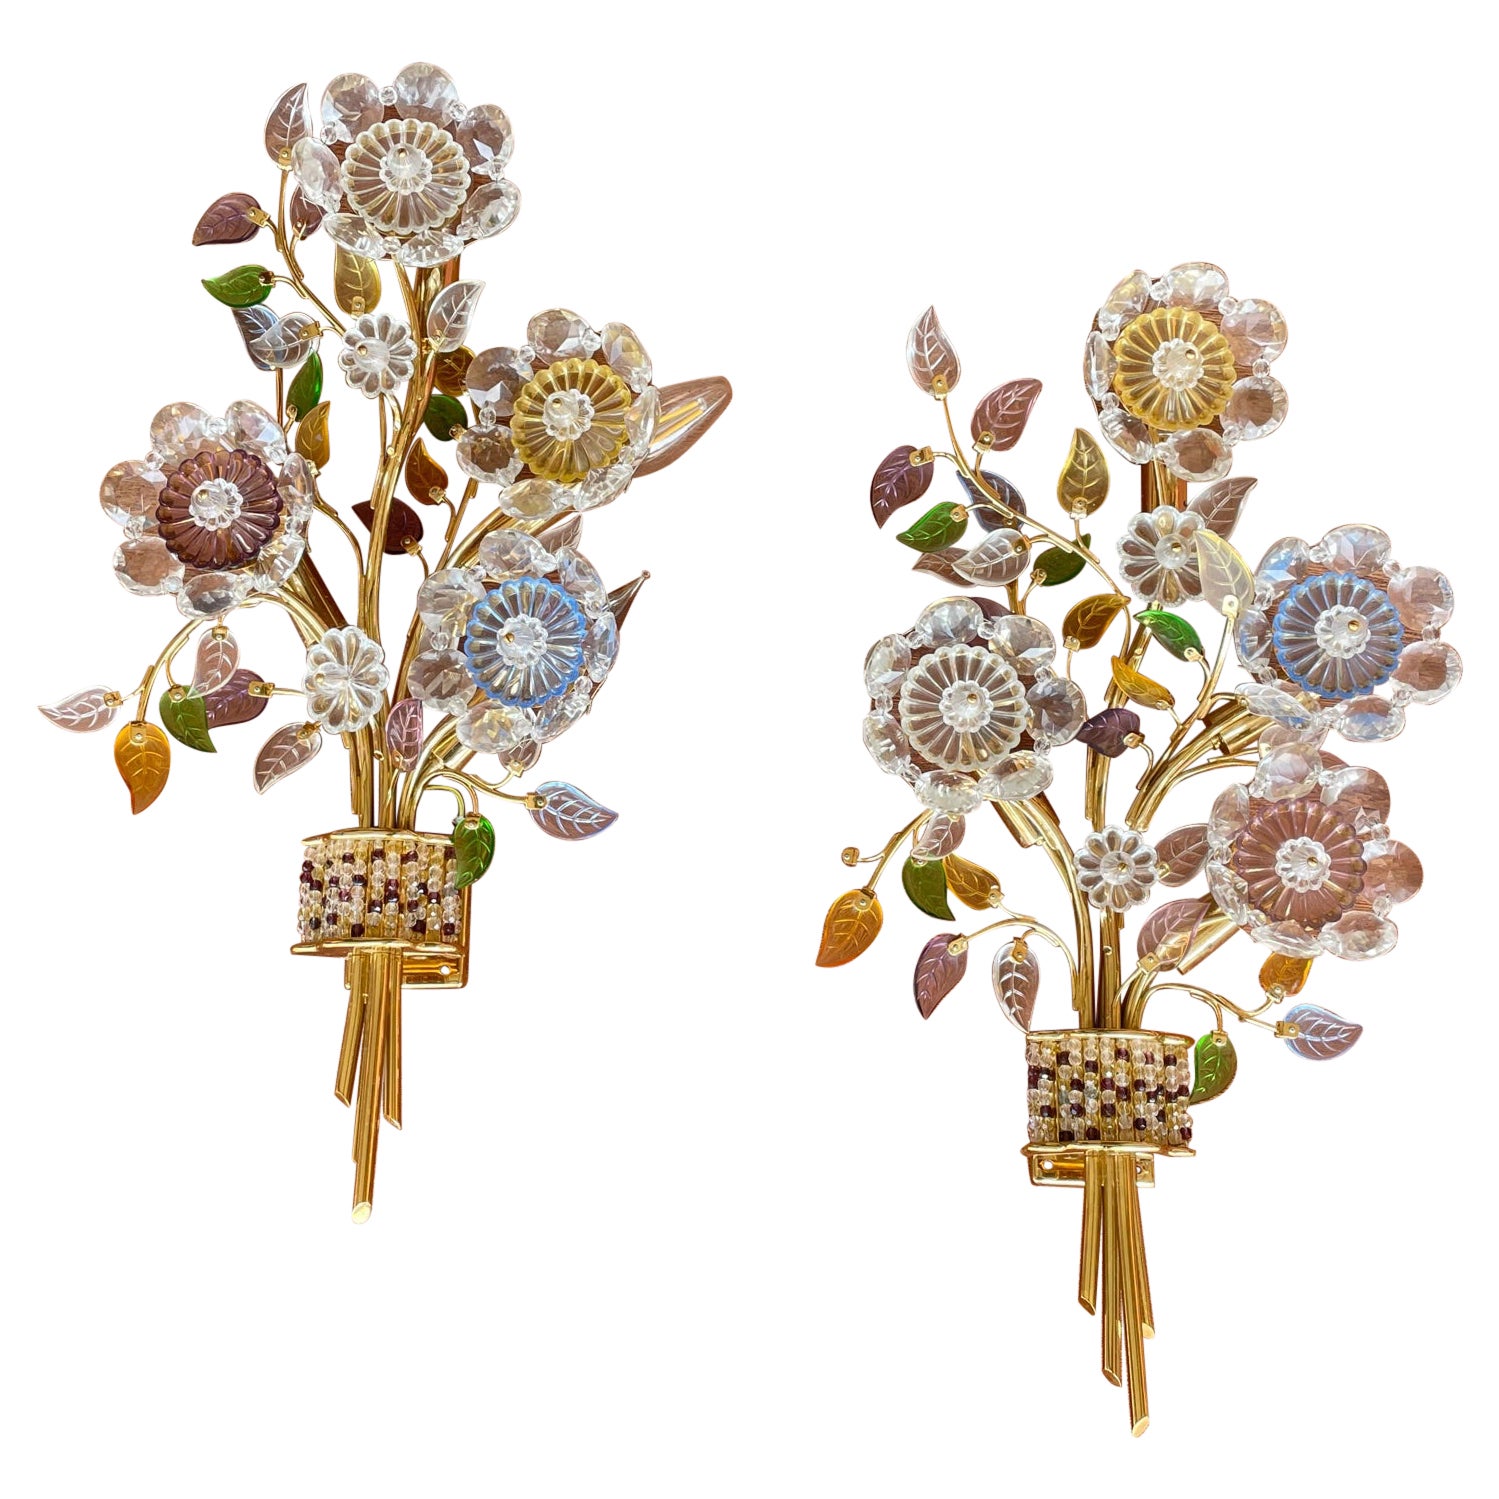 Hollywood Regency Brass and Glass Floral Bouquet Wall Sconces